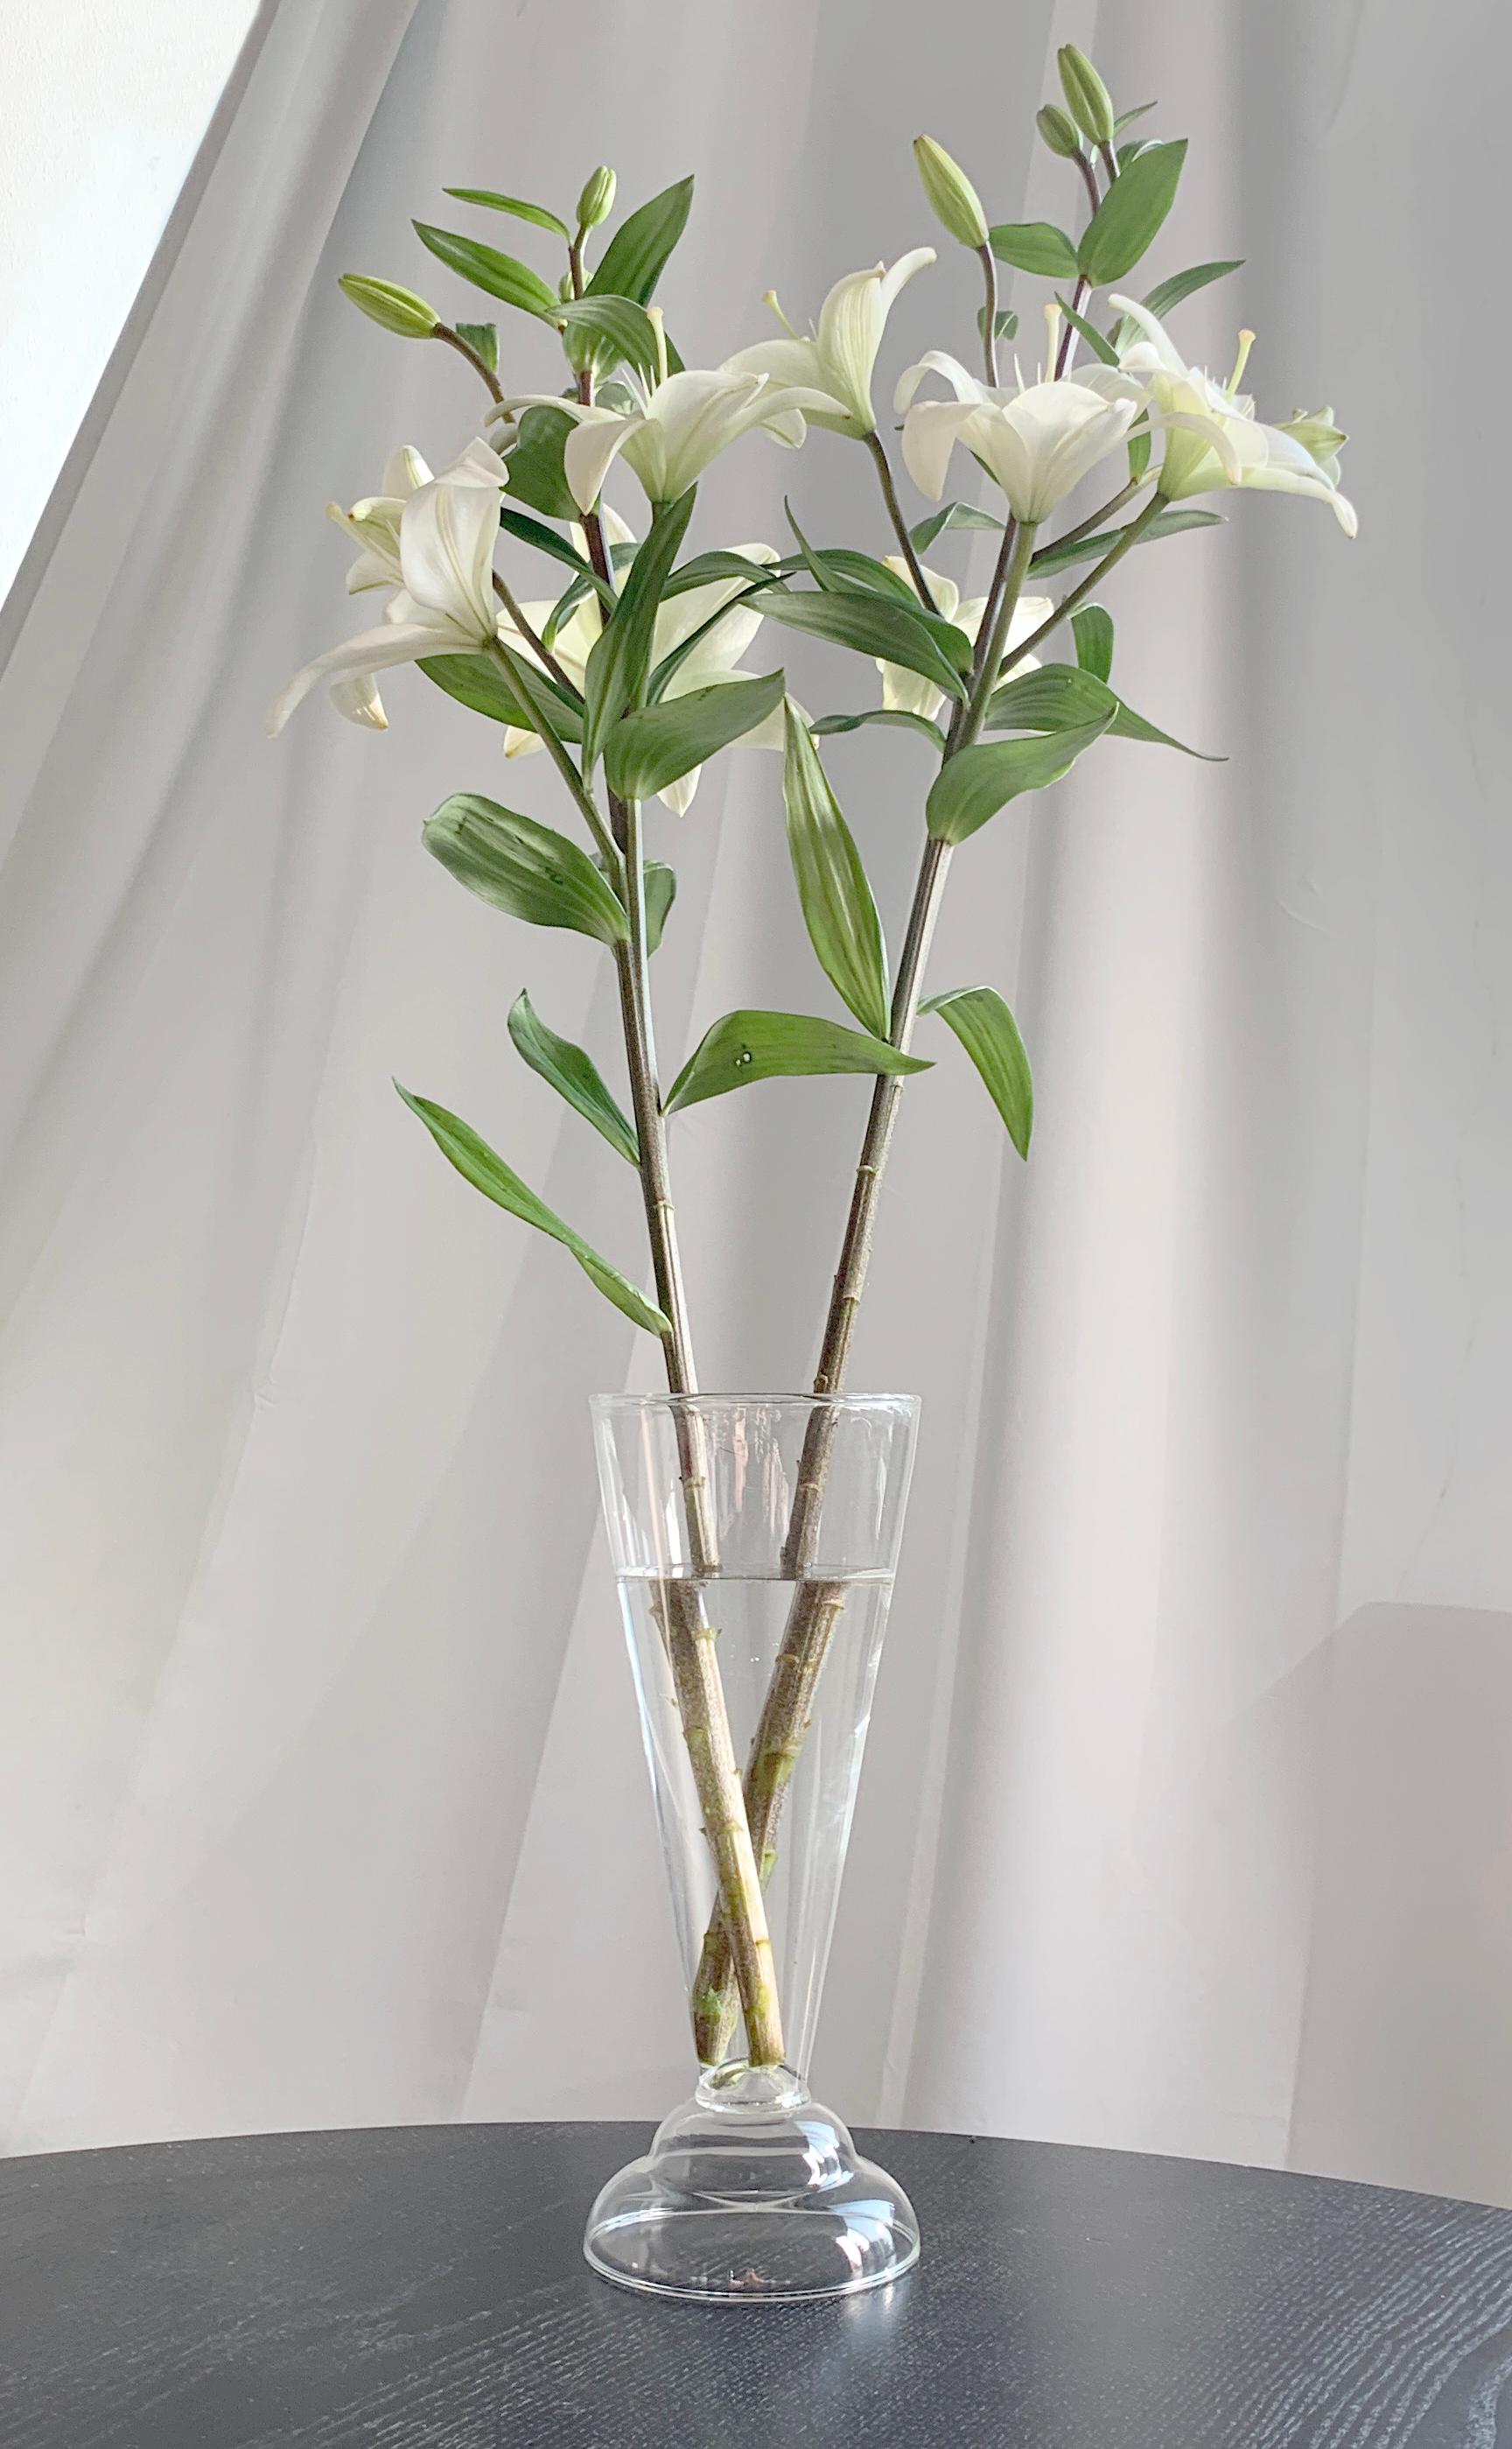 21st Century Contemporary Glass Vase Handmade in Italy by Ilaria Bianchi. It's a part of Le Coppe collection which which also consists of other beautiful glasses for wine, water and etc.

Le Coppe vase is masterly handblown in Italy in borosilicate